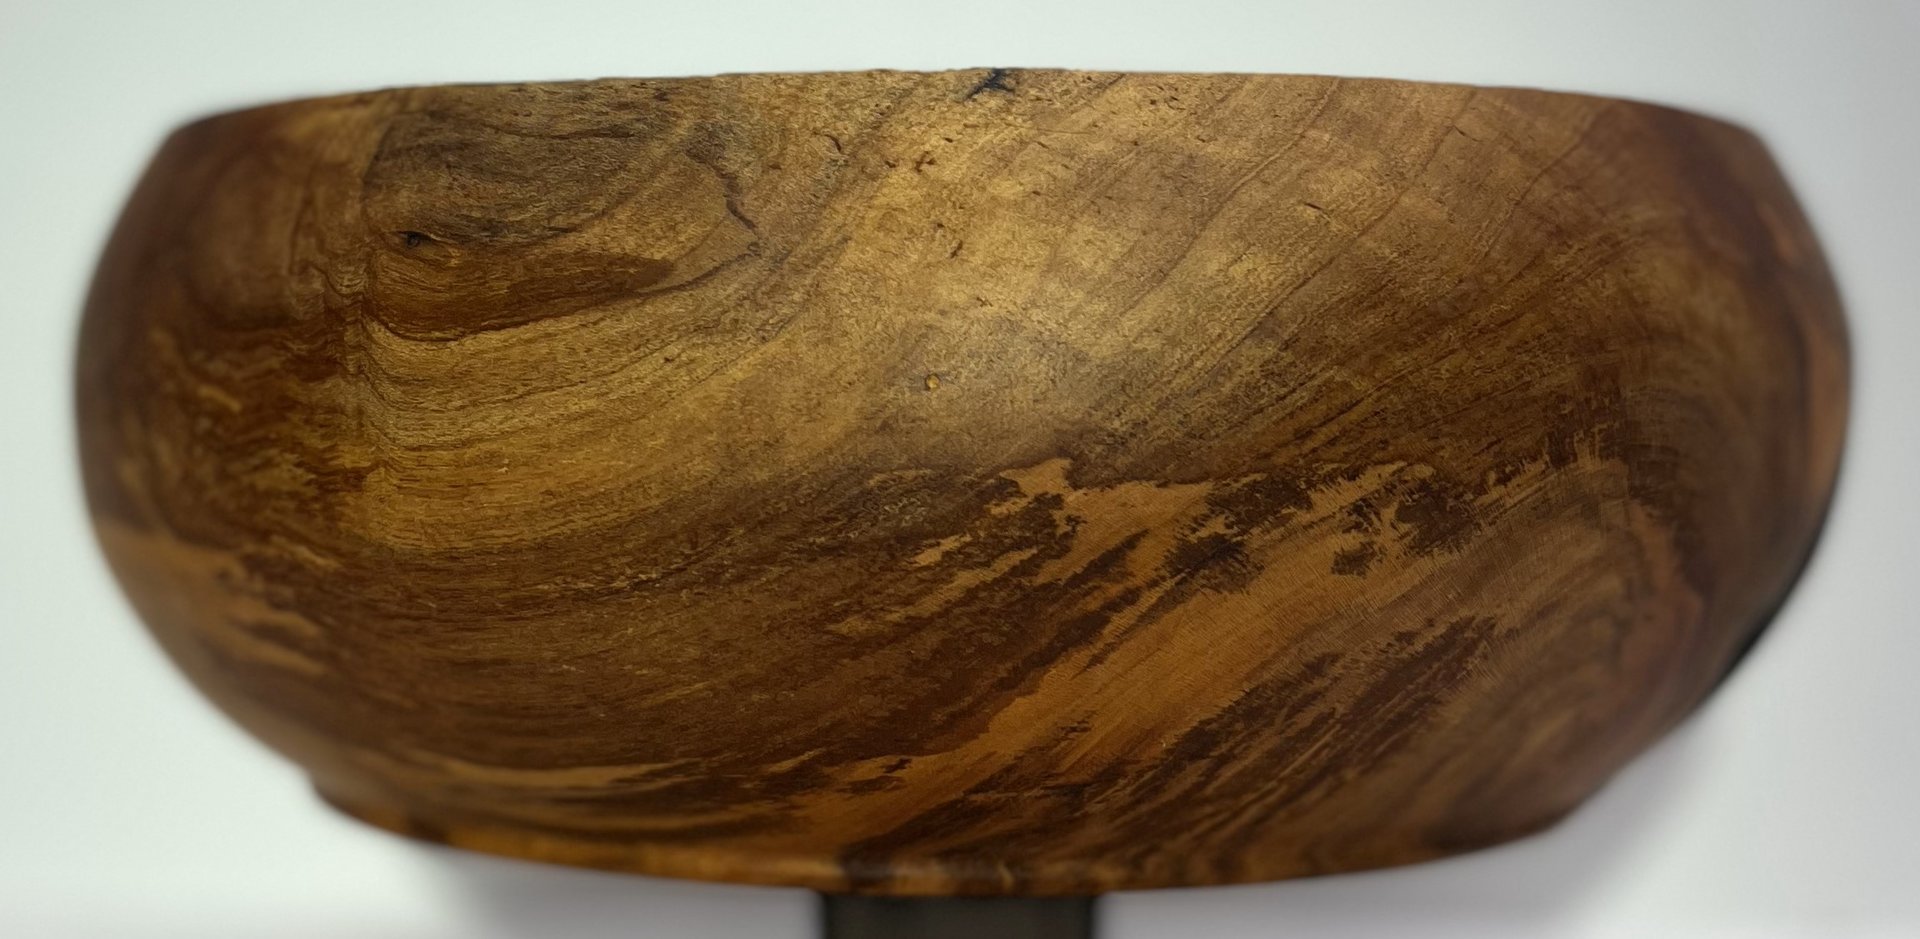 Bowl from a stump, w/ natural edge